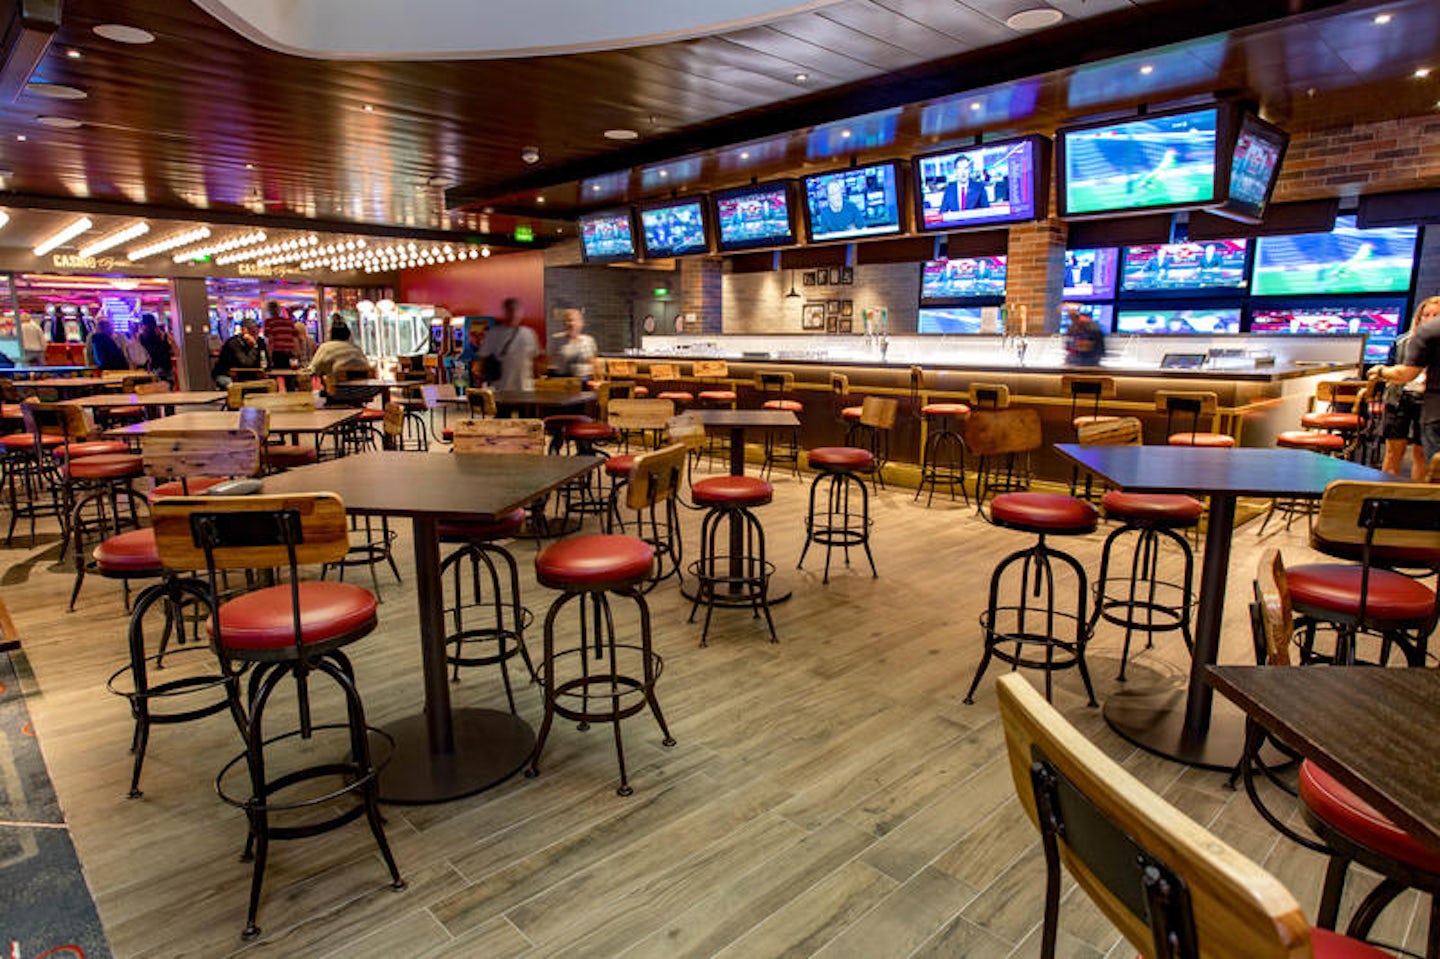 Playmakers Sports Bar & Arcade on Independence of the Seas